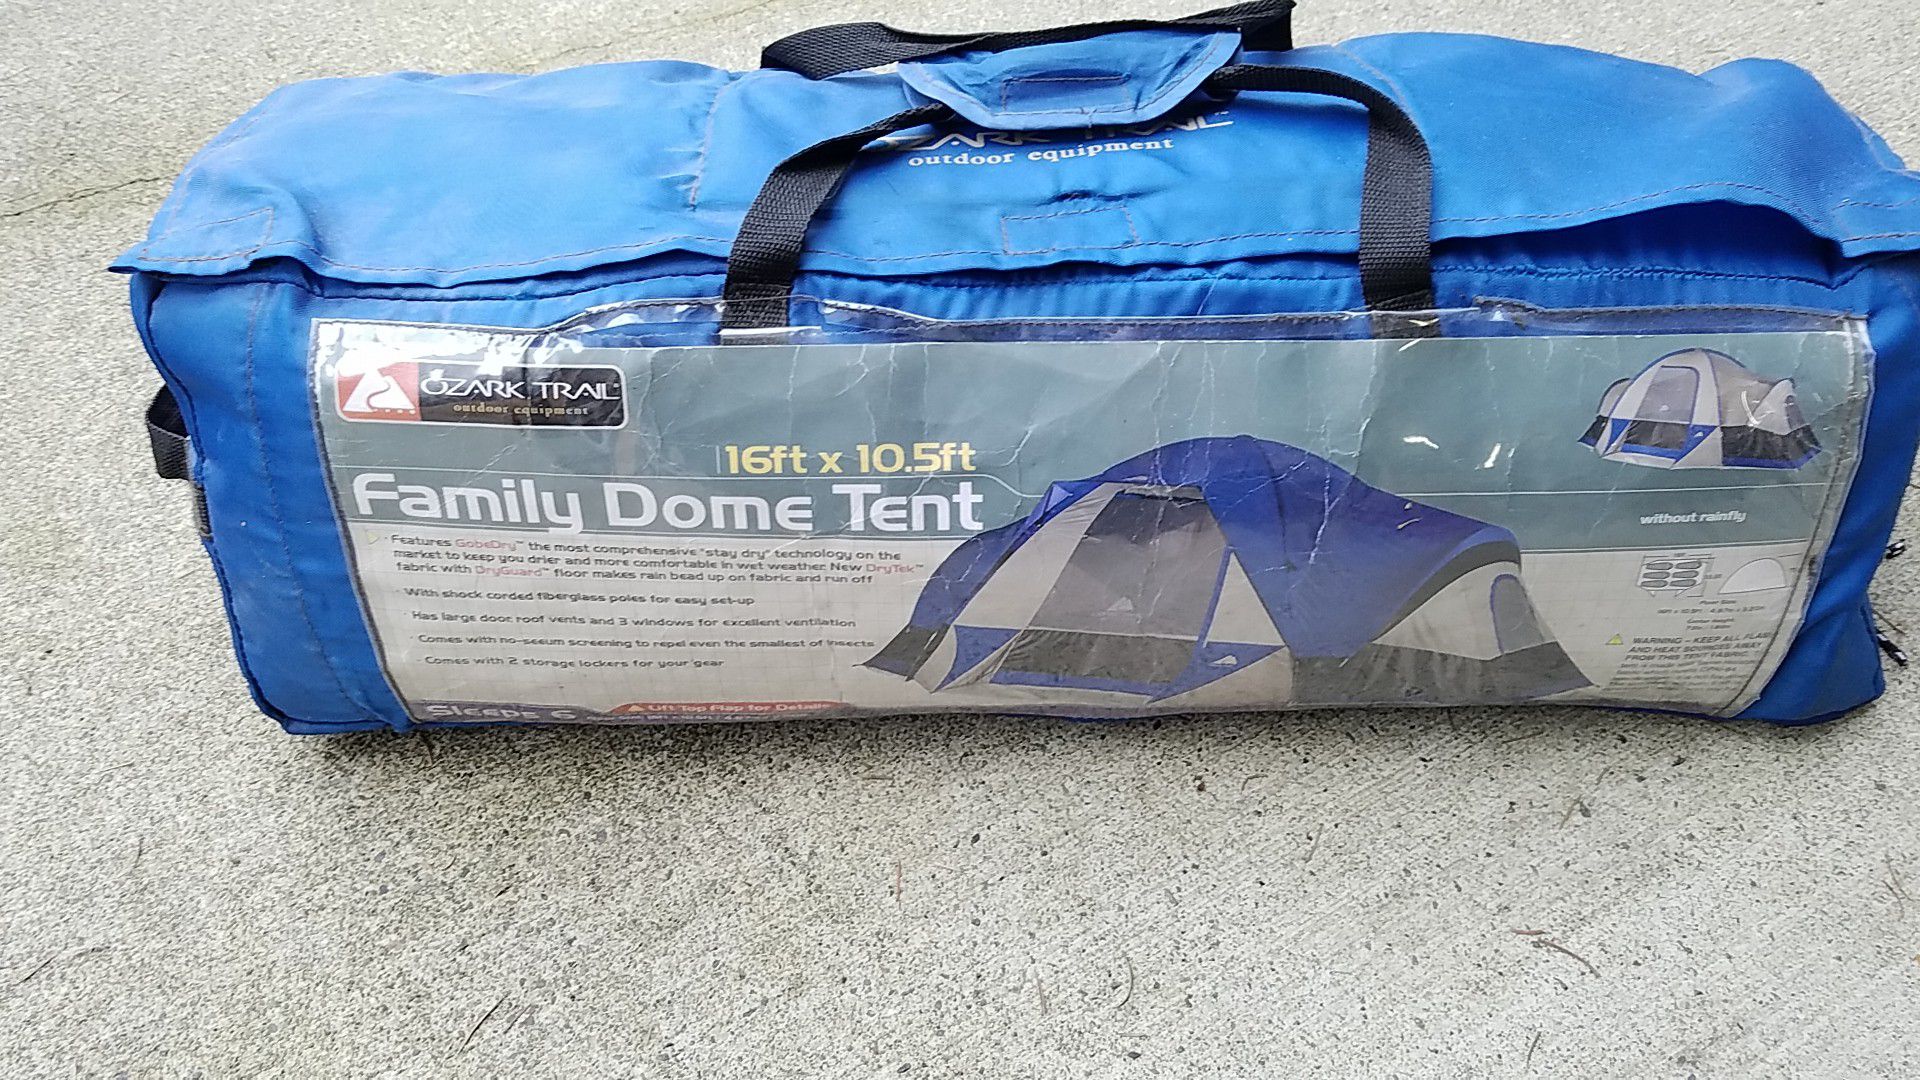 16 x 10 and 1/2 foot family Dome Tent